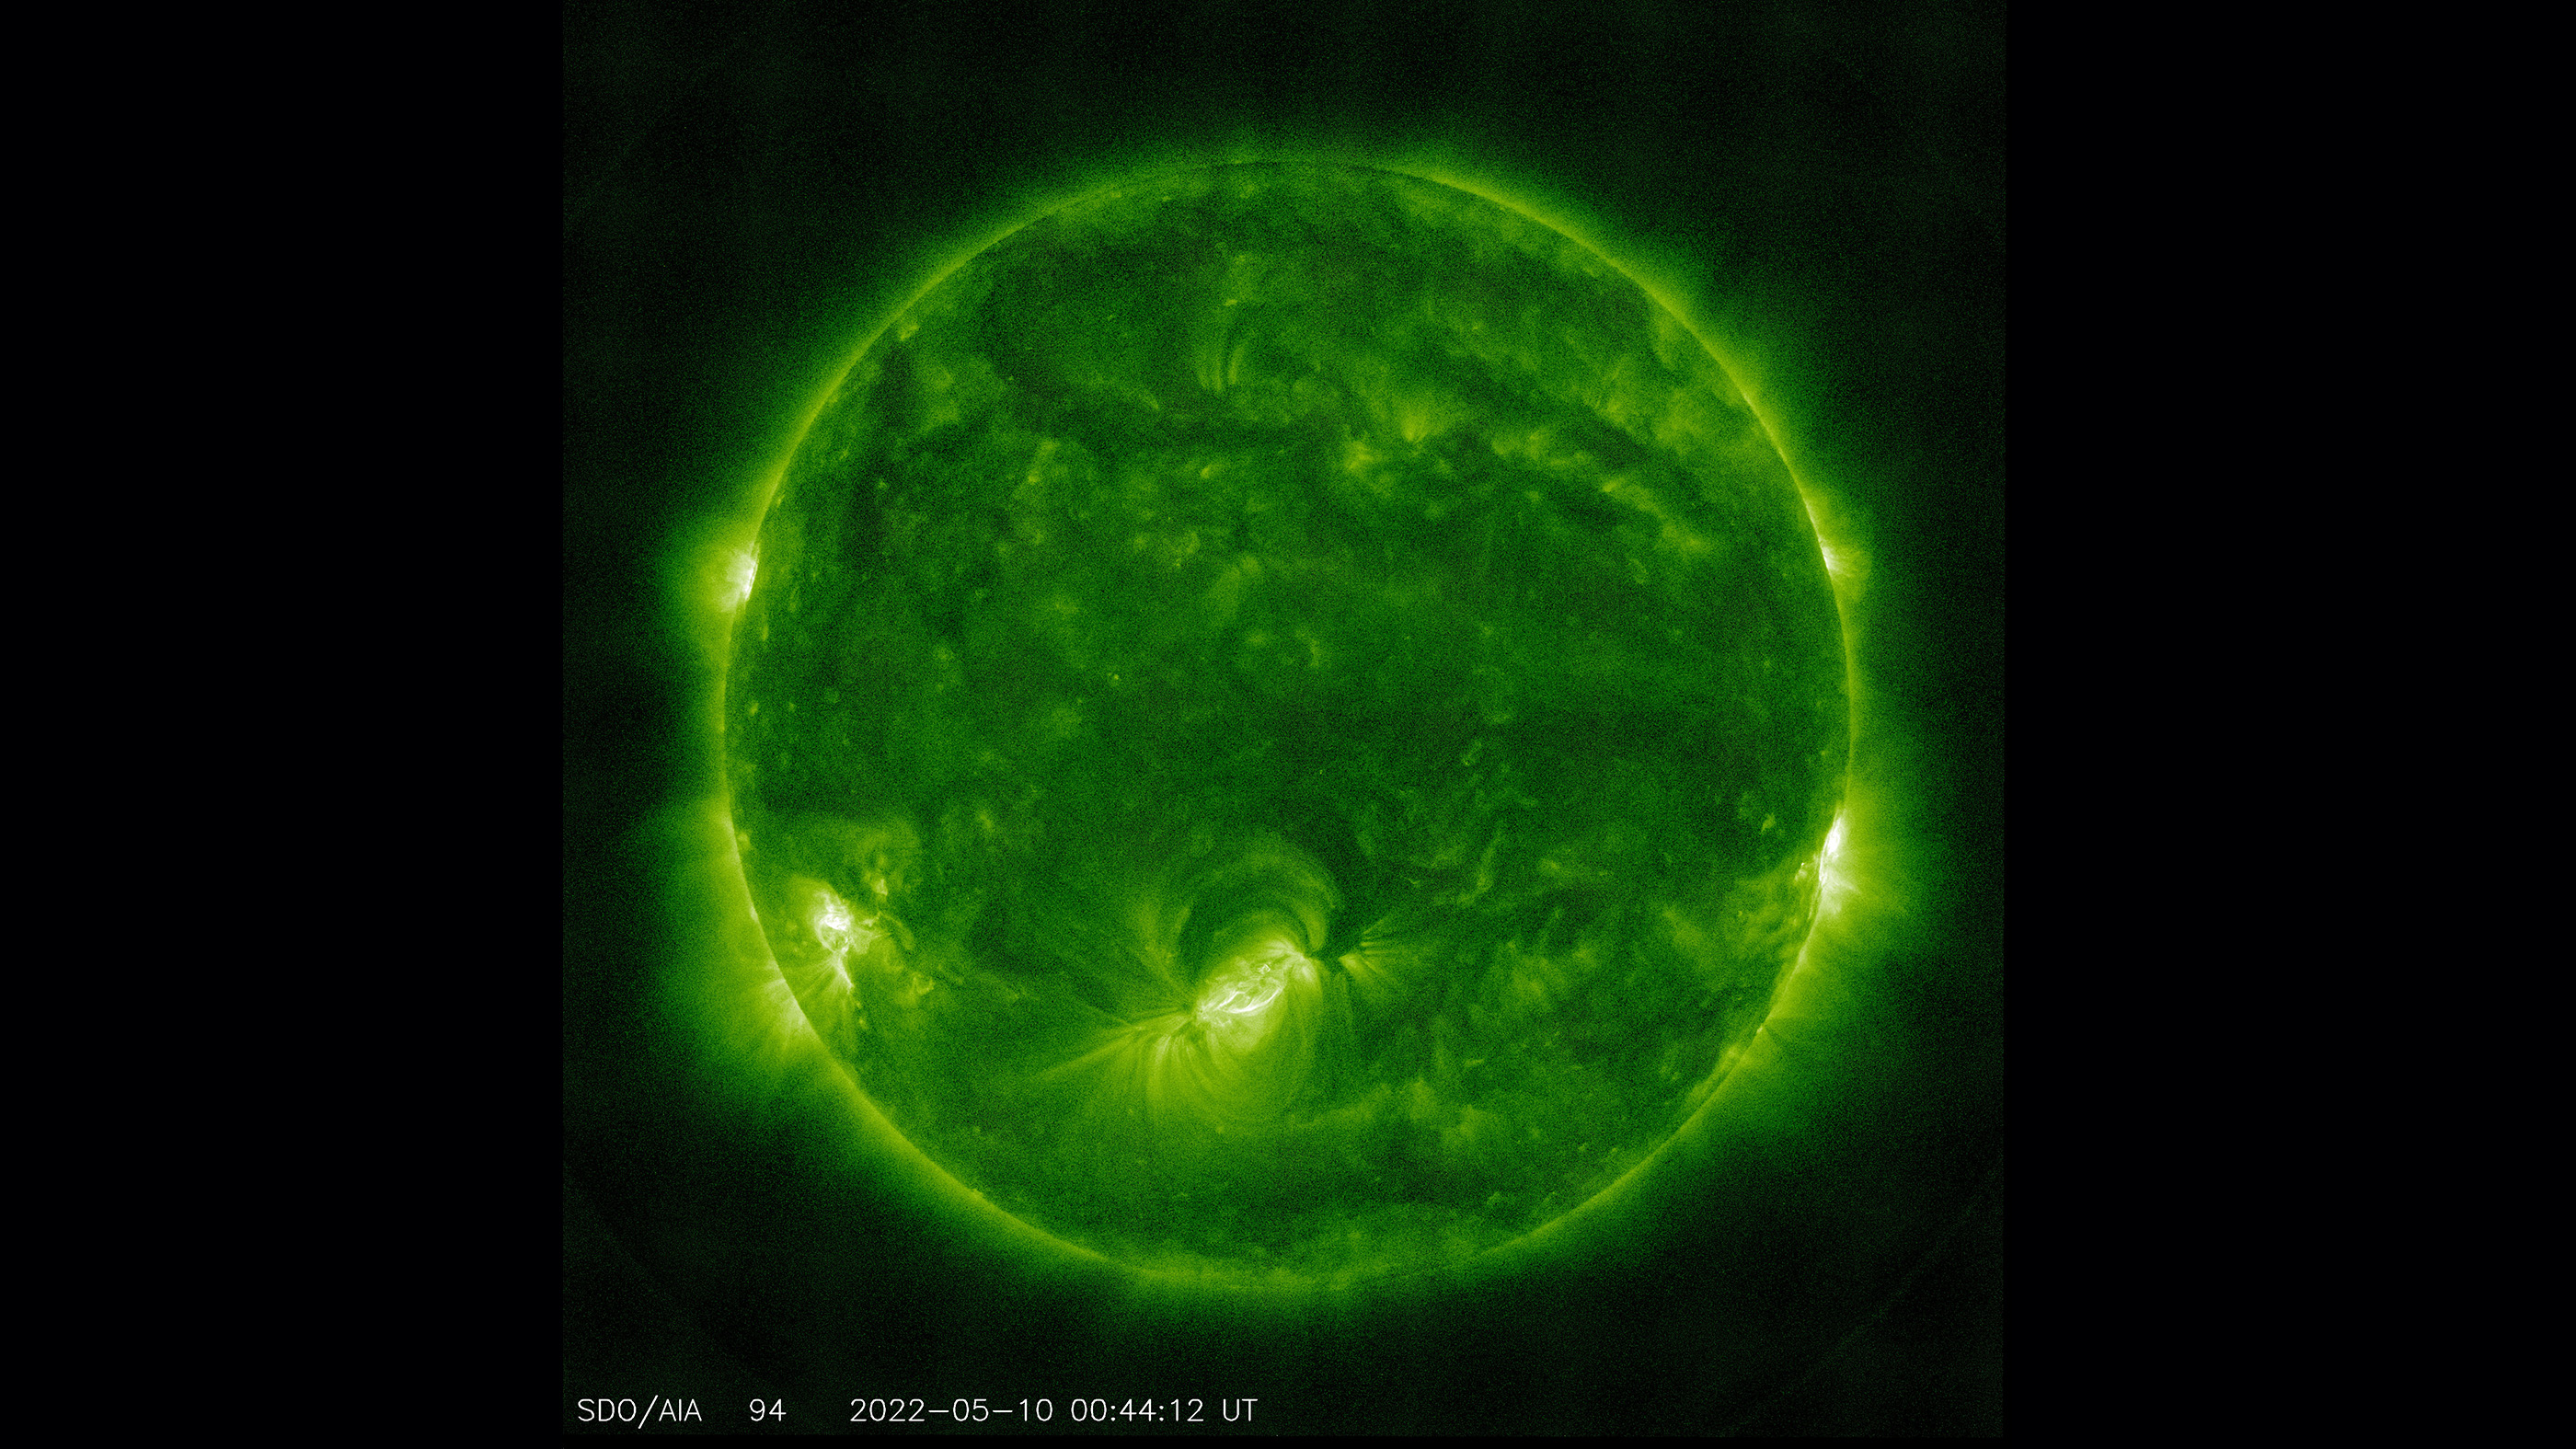 Shortly before 9 a.m. in New York on Tuesday, when the Solar Dynamics Observatory took this photograph of the sun at a wavelength of 94 angstroms, sunspot region AR3006 (bottom center) emitted a powerful solar flare, classified X1 .5